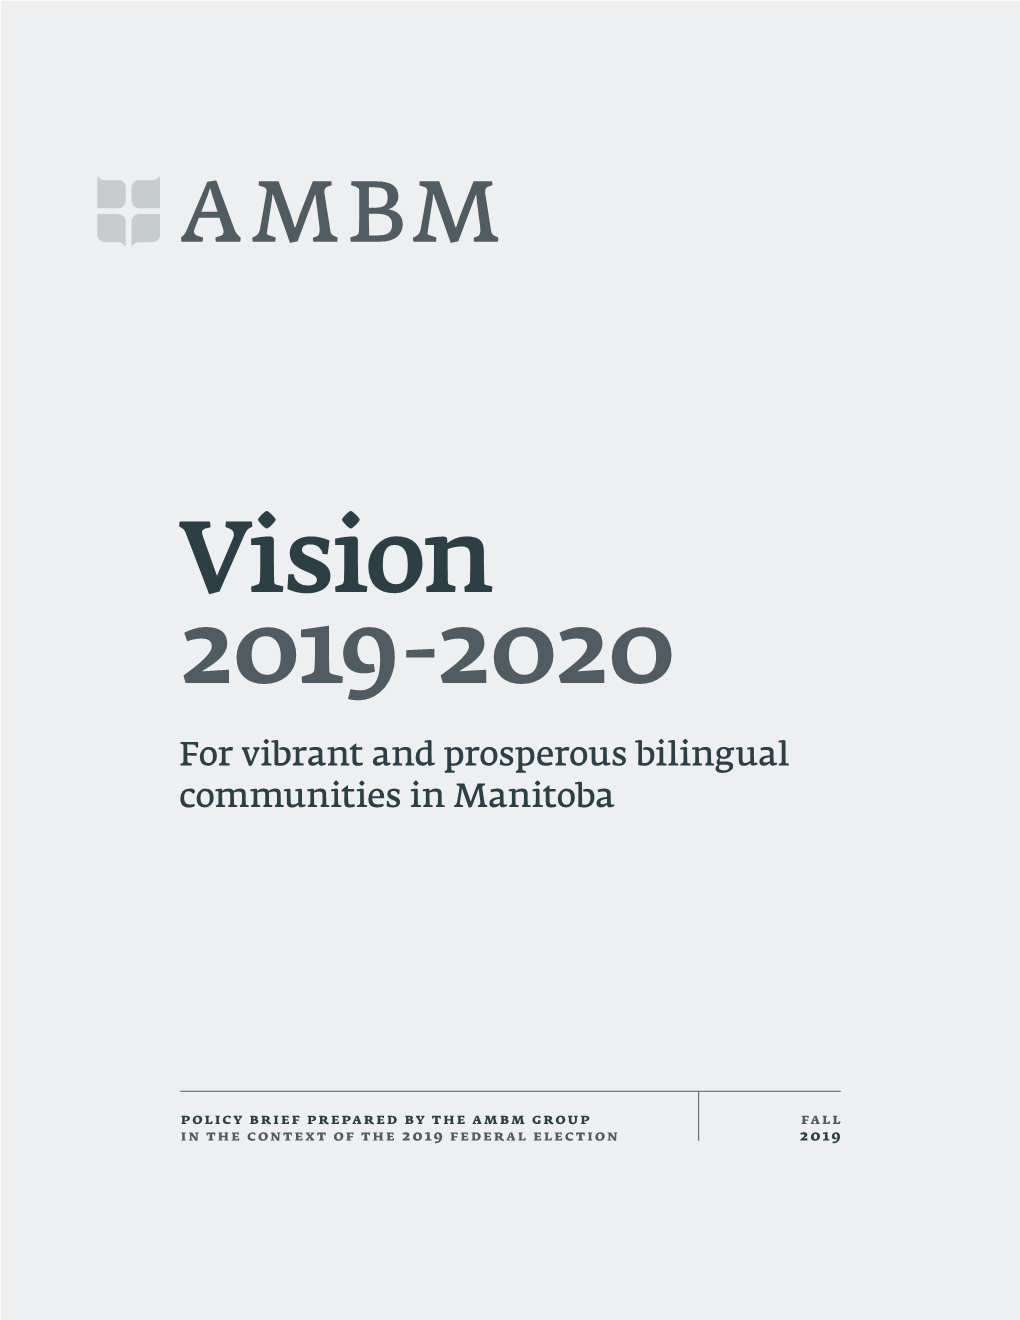 Vision 2019-2020 for Vibrant and Prosperous Bilingual Communities in Manitoba